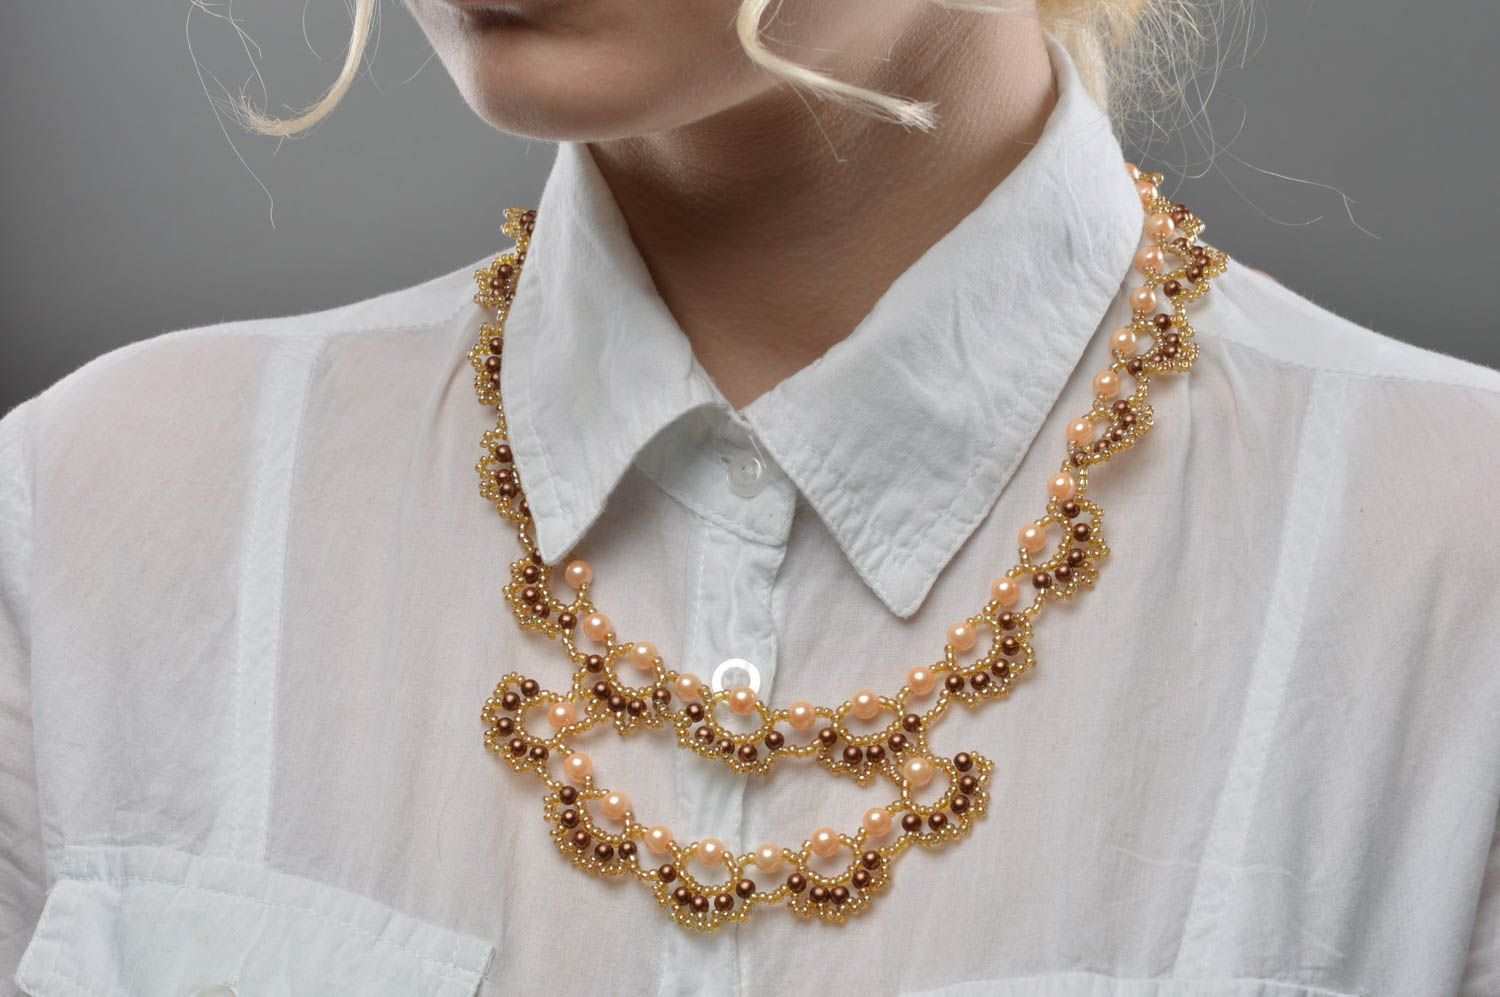 Beaded necklace handmade vintage accessory for women designer jewelry photo 5